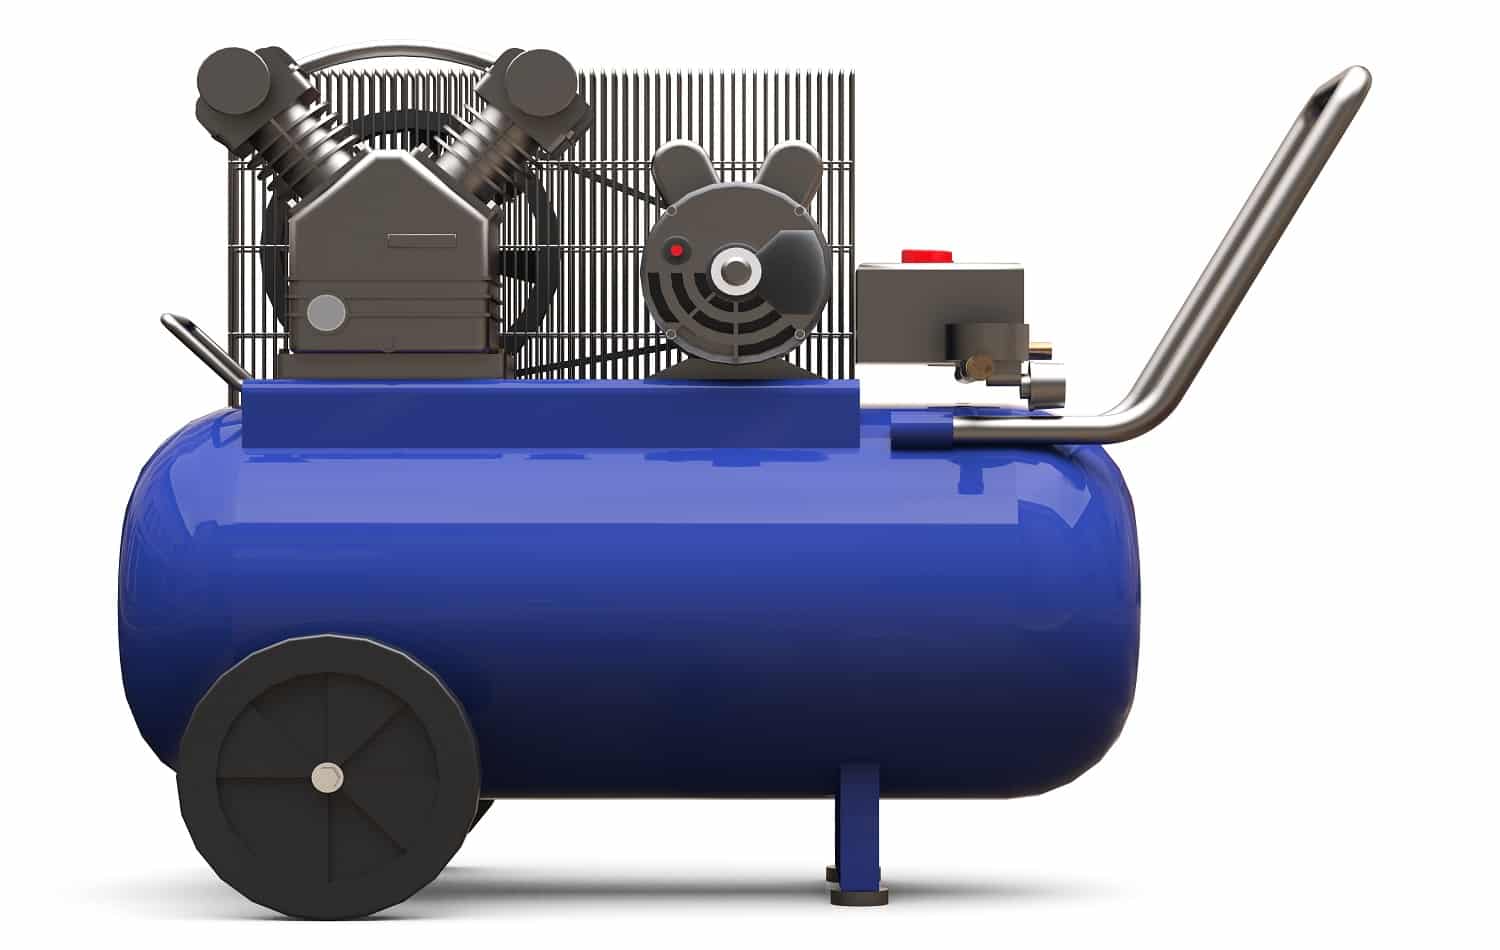 Blue horizontal air compressor isolated on a white background. 3d illustration